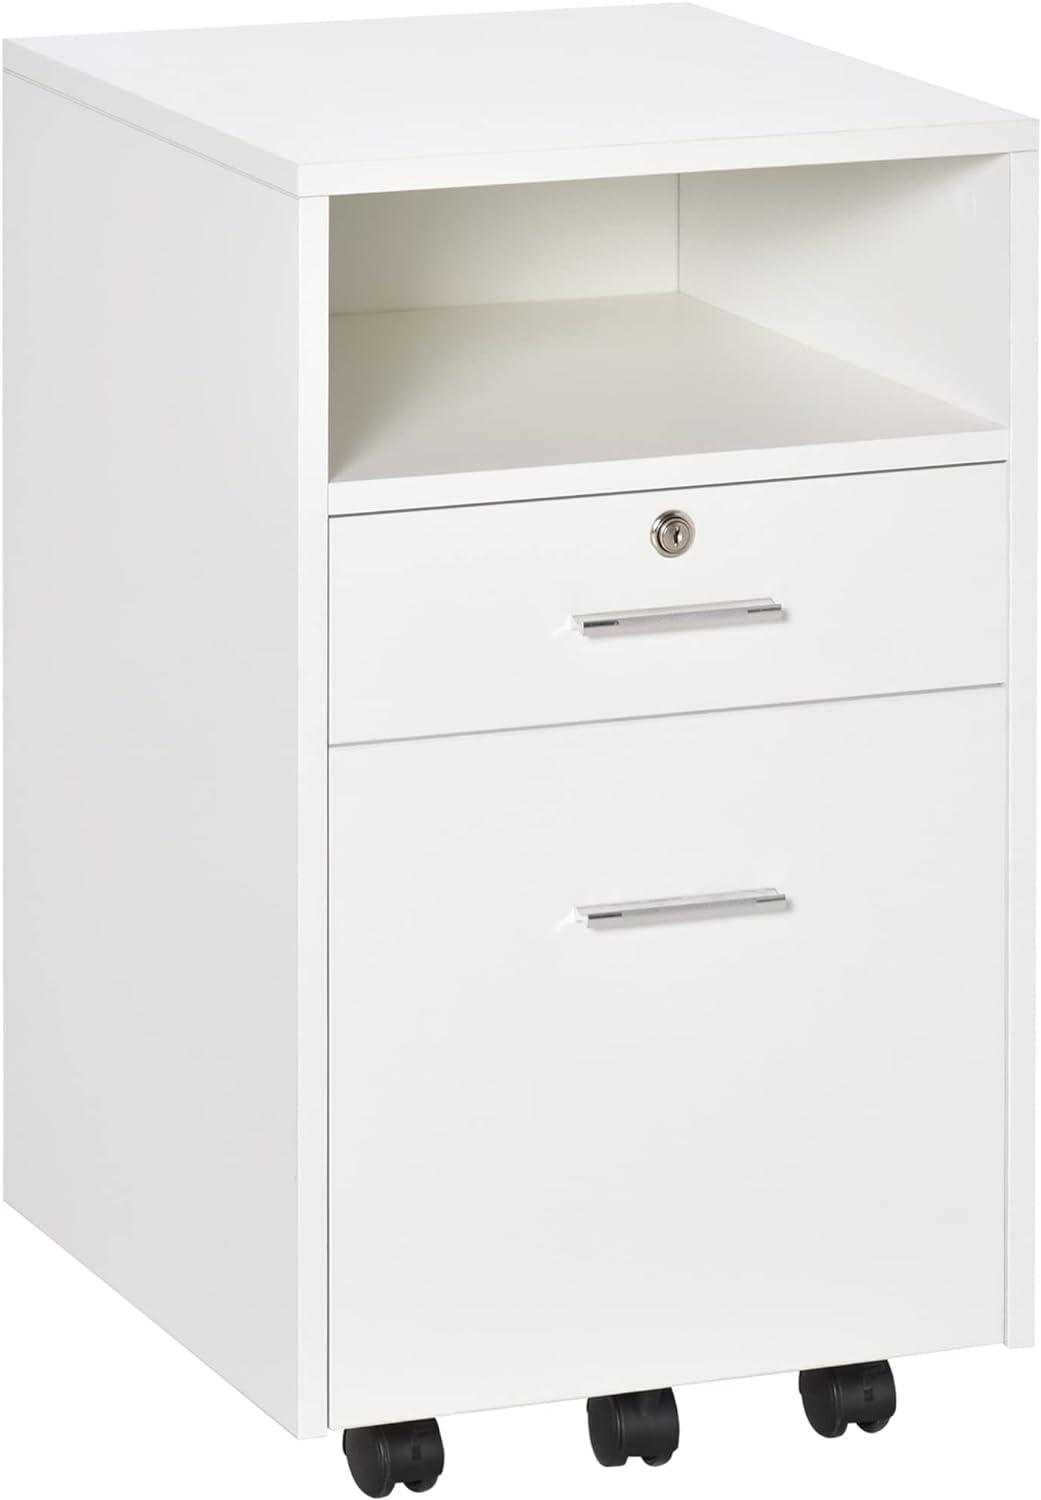 2 Drawer Filing Cabinet with Lock, Vertical File Cabinet with Wheels, Mobile Office Cabinet for A4, Letter Size, White - Furniture4Design